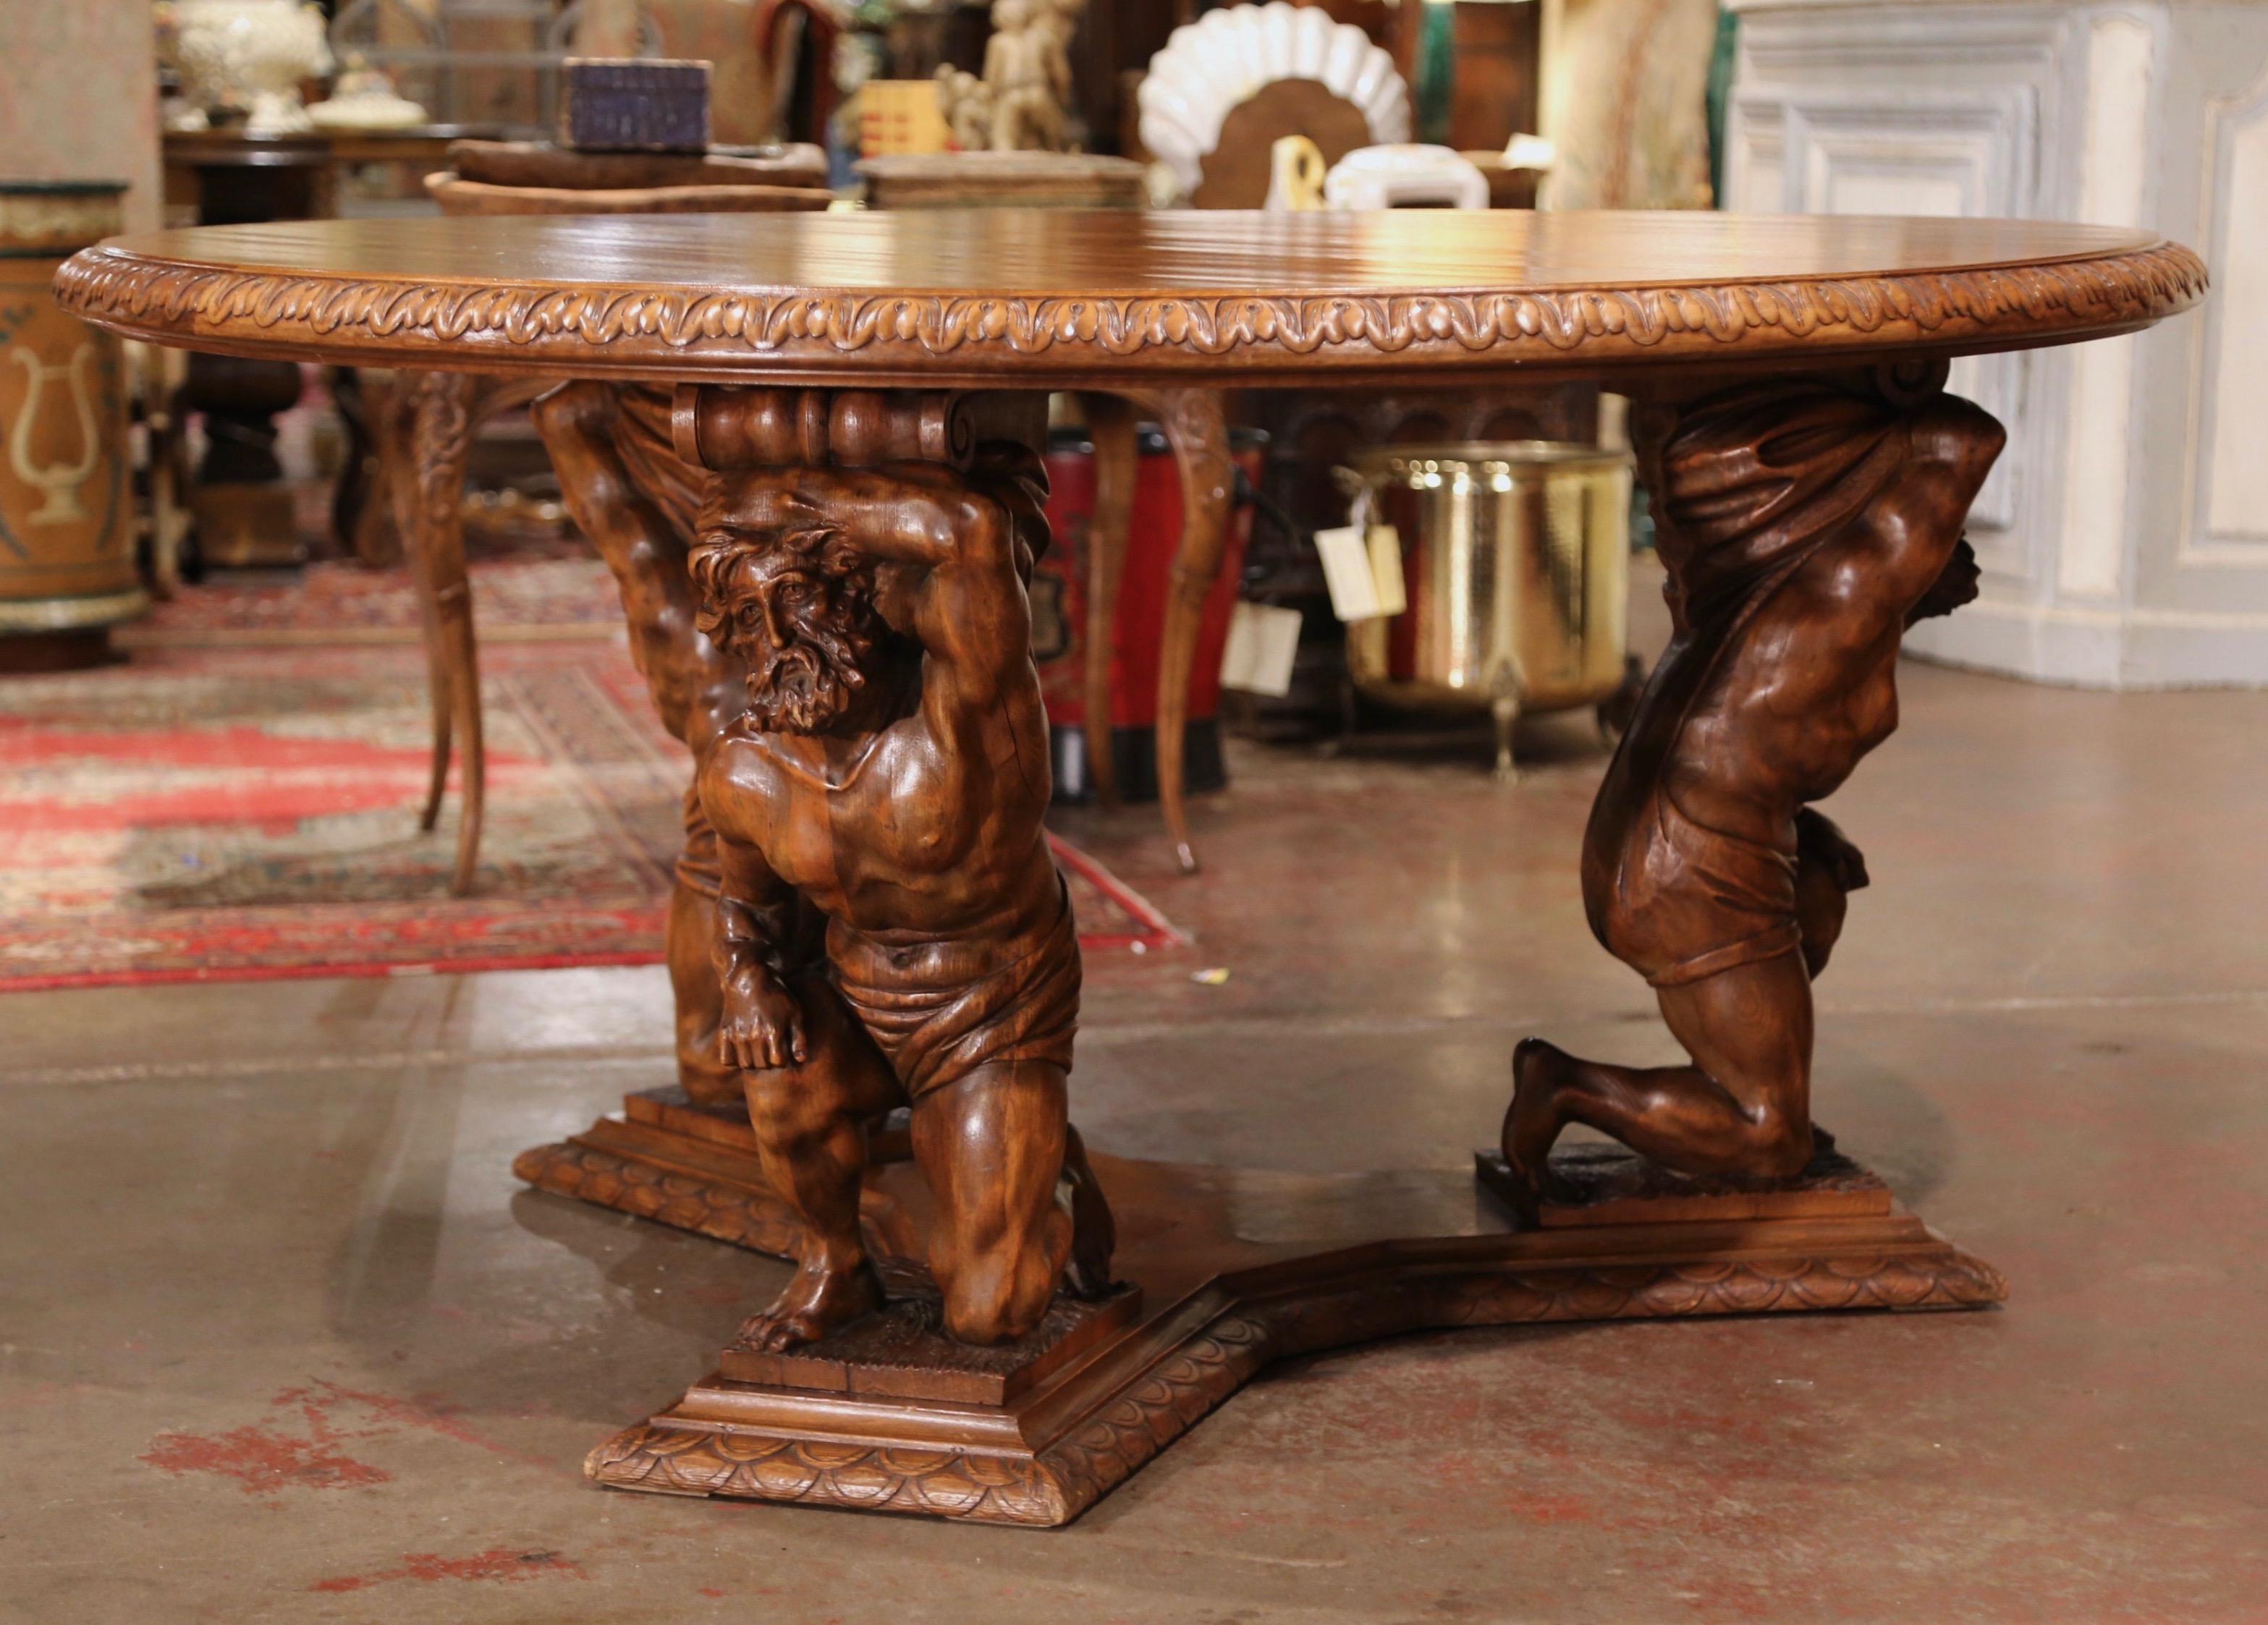 This unusual, sculptural fruitwood table was crafted in Italy, circa 1890. The round center table with a decorative carved edge, features an intricate base with three hand carved Greek men figures resembling Atlas resting on their knees, and